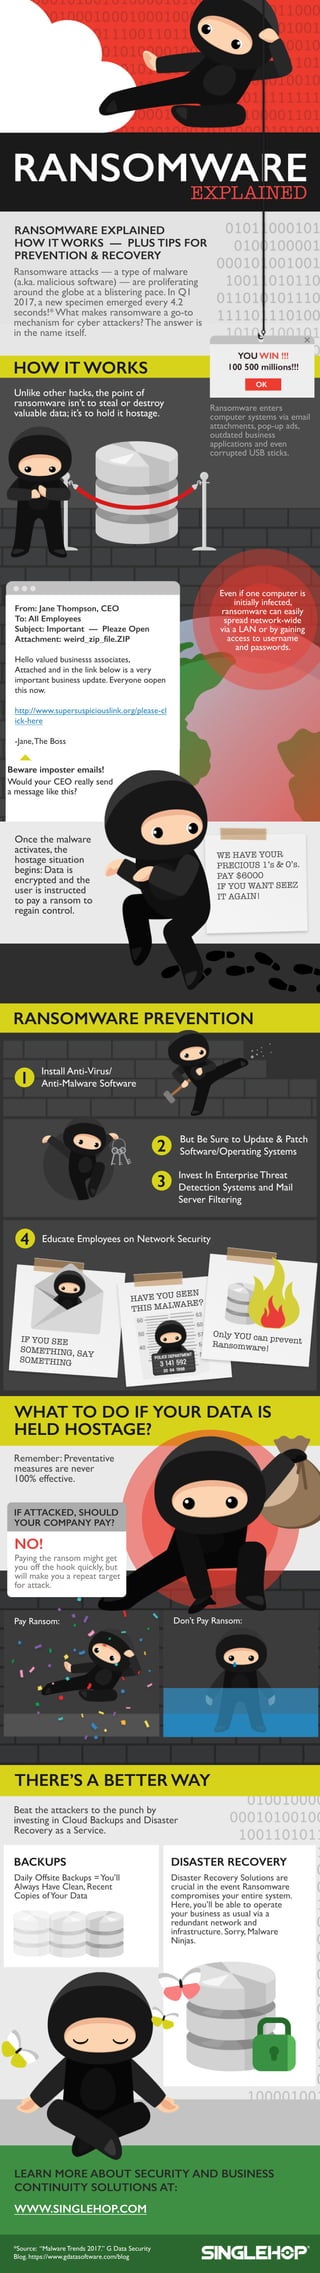 Unlikeotherhacks,thepointof
ransomwareisn’ttostealordestroy
valuabledata;it’stoholdithostage.
HOW ITWORKS
RANSOMWAREPREVENTION
RANSOMWAREEXPLAINED
HOW ITWORKS— PLUSTIPSFOR
PREVENTION&RECOVERY
Ransomwareenters
computersystemsviaemail
attachments,pop-upads,
outdatedbusiness
applicationsandeven
corruptedUSBsticks.
Ransomwareattacks— atypeofmalware
(a.ka.malicioussoftware)— areproliferating
aroundtheglobeatablisteringpace.InQ1
2017,anewspecimenemergedevery4.2
seconds!*Whatmakesransomwareago-to
mechanismforcyberattackers?Theansweris
inthenameitself.
Beattheattackerstothepunchby
investinginCloudBackupsandDisaster
RecoveryasaService.
PayRansom:
DailyOffsiteBackups=You’ll
AlwaysHaveClean,Recent
CopiesofYourData
Don’tPayRansom:
poster poster poster
RANSOMWARE
WEHAVEYOUR
PRECIOUS1’s&0’s.
PAY$6000
IFYOUWANTSEEZ
ITAGAIN!
1
2
3
4
IFYOUSEE
SOMETHING,SAY
SOMETHING
HAVEYOUSEEN
THISMALWARE?
Remember:Preventative
measuresarenever
100%effective.
WHATTODOIFYOURDATAIS
HELDHOSTAGE?
DisasterRecoverySolutionsare
crucialintheeventRansomware
compromisesyourentiresystem.
Here,you’llbeabletooperate
yourbusinessasusualviaa
redundantnetworkand
infrastructure.Sorry,Malware
NinjasNinjas.
THERE’SABETTERWAY
BACKUPS DISASTERRECOVERY
*Source:“MalwareTrends2017.”GDataSecurity
Blog.https://www.gdatasoftware.com/blog
Evenifonecomputeris
initiallyinfected,
ransomwarecaneasily
spreadnetwork-wide
viaaLANorbygaining
accesstousername
andpasswords.
Bewareimposteremails!
WouldyourCEOreallysend
amessagelikethis?
Oncethemalware
activates,the
hostagesituation
begins:Datais
encryptedandthe
userisinstructed
topayaransomto
regaincontregaincontrol.
ButBeSuretoUpdate&Patch
Software/OperatingSystems
EducateEmployeesonNetworkSecurity
InstallAnti-Virus/
Anti-MalwareSoftware
InvestInEnterpriseThreat
DetectionSystemsandMail
ServerFiltering
Payingtheransommightget
youoffthehookquickly,but
willmakeyouarepeattarget
forattack.
IFATTACKED,SHOULD
YOURCOMPANYPAY?
NO!
RANSOMWAREEXPLAINED
OnlyYOUcanpreventRansomware!
 